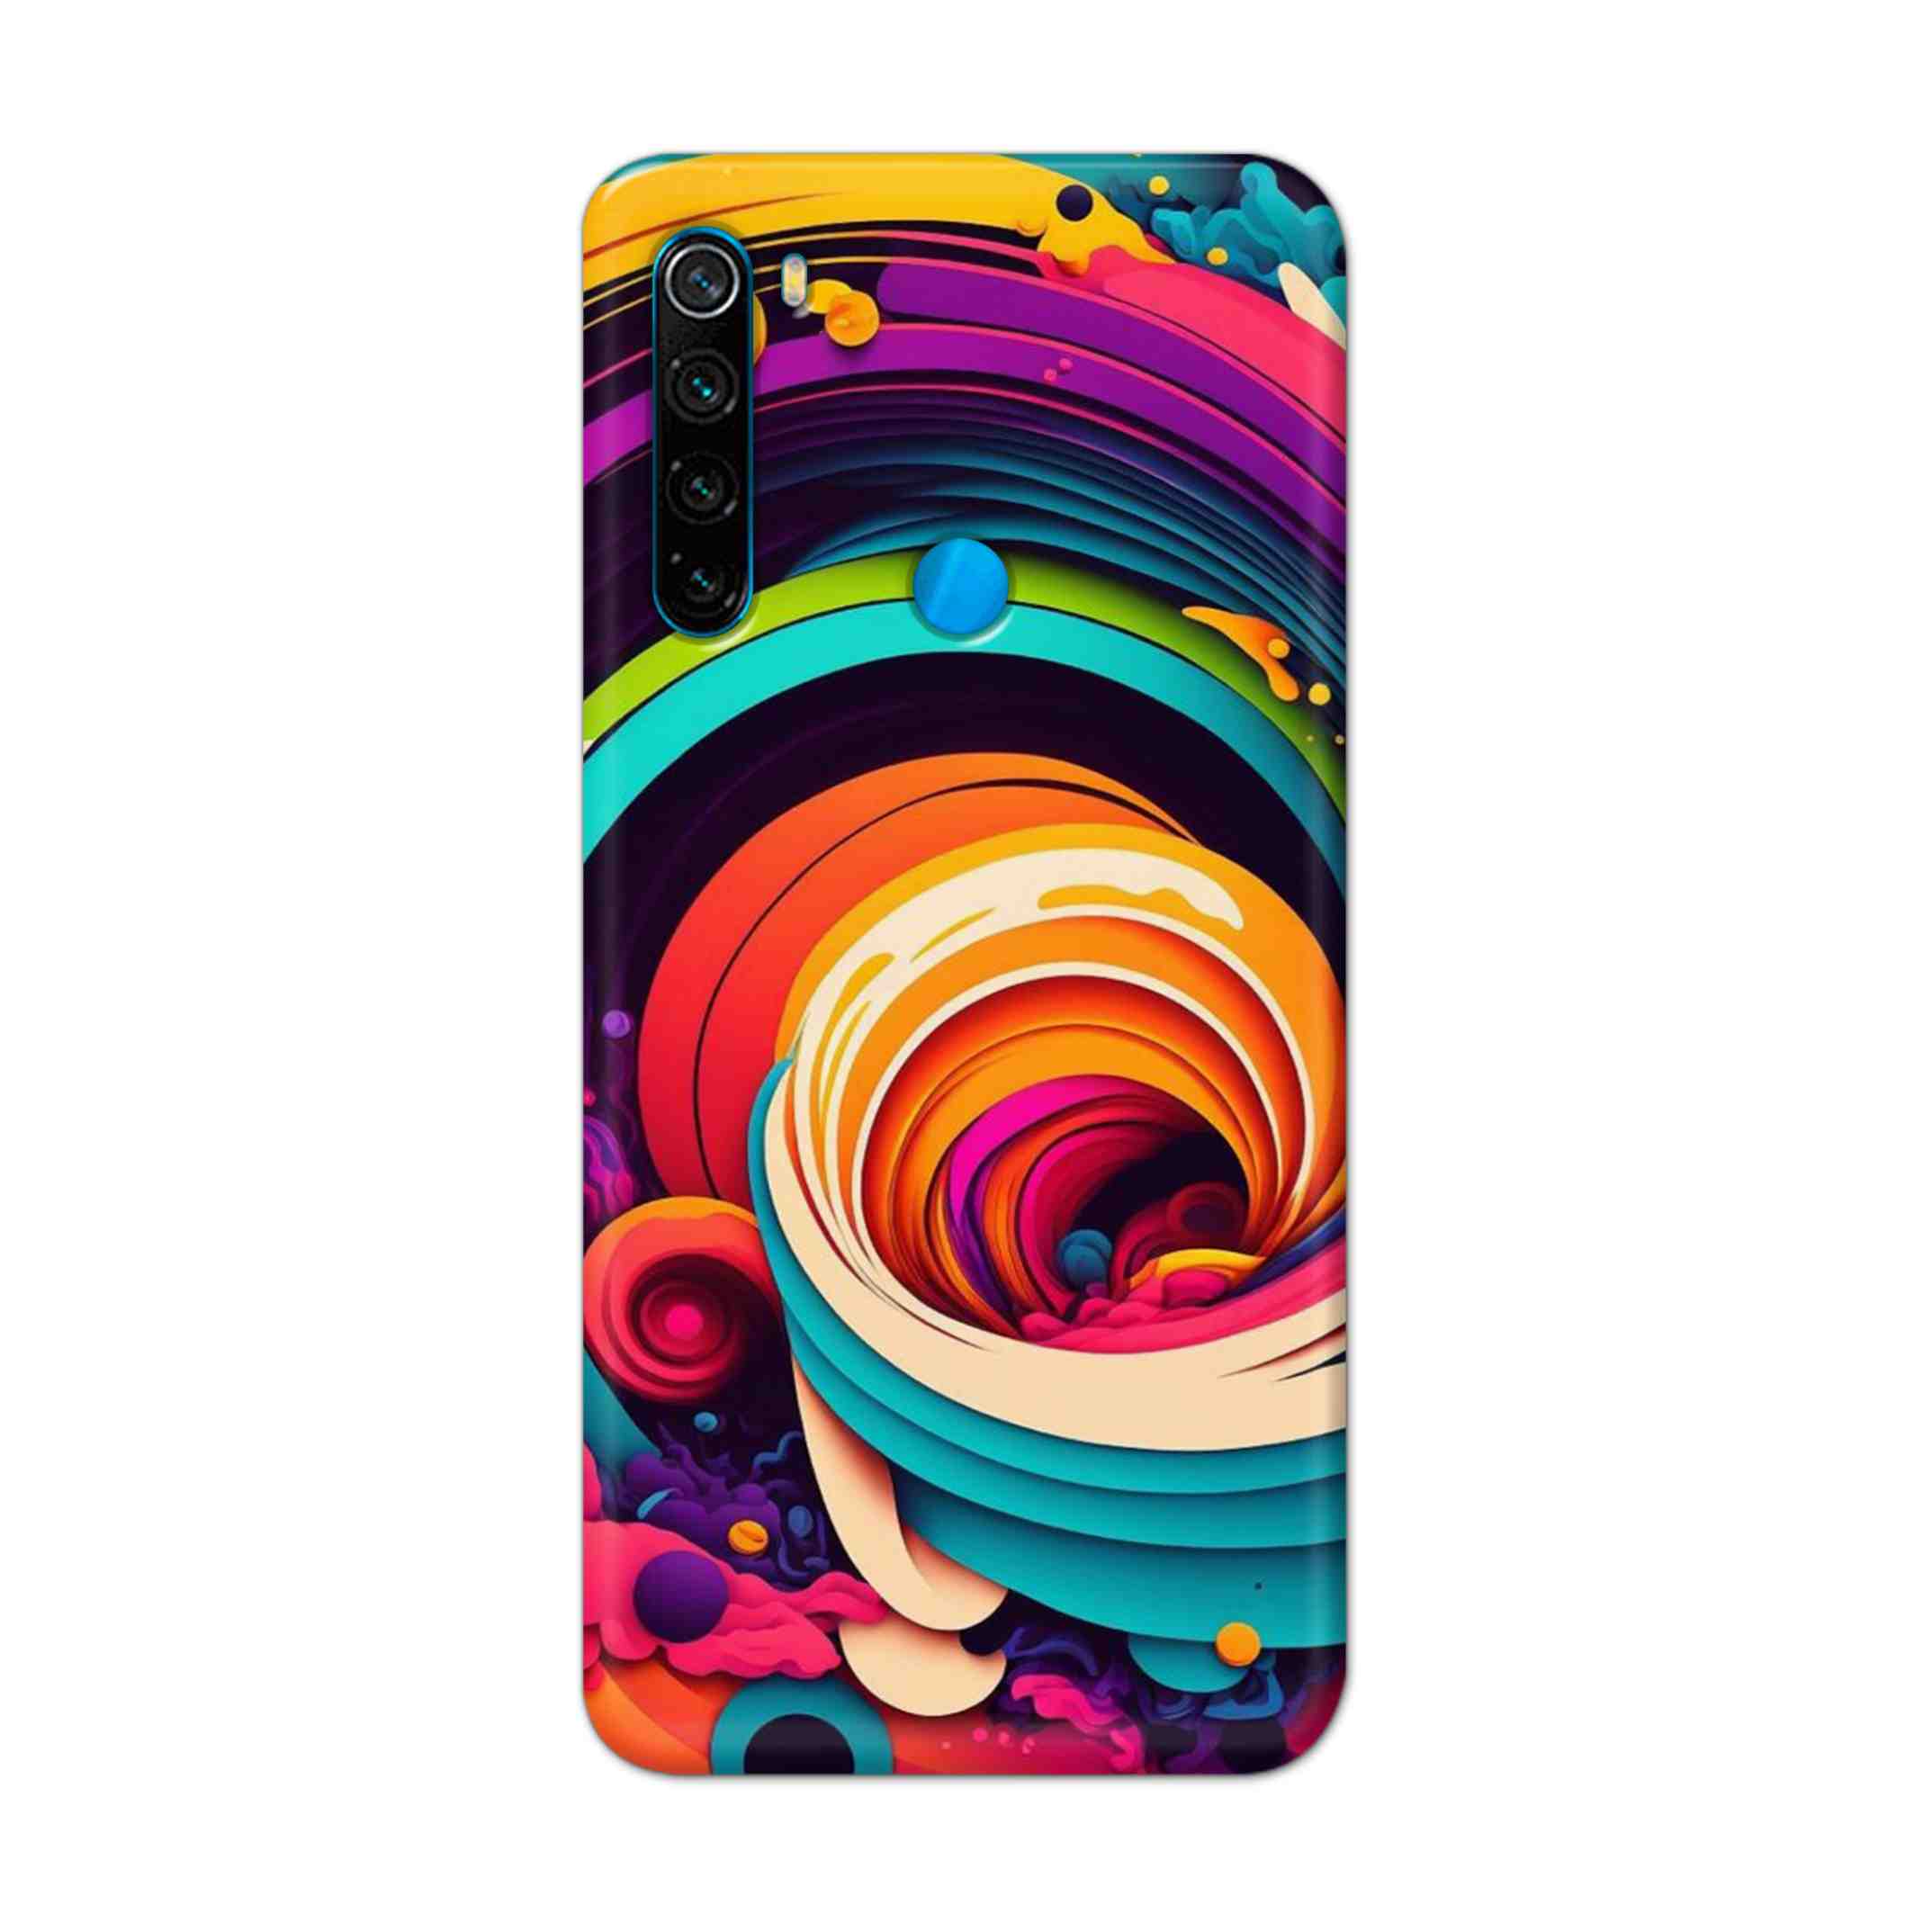 Buy Colour Circle Hard Back Mobile Phone Case Cover For Xiaomi Redmi Note 8 Online